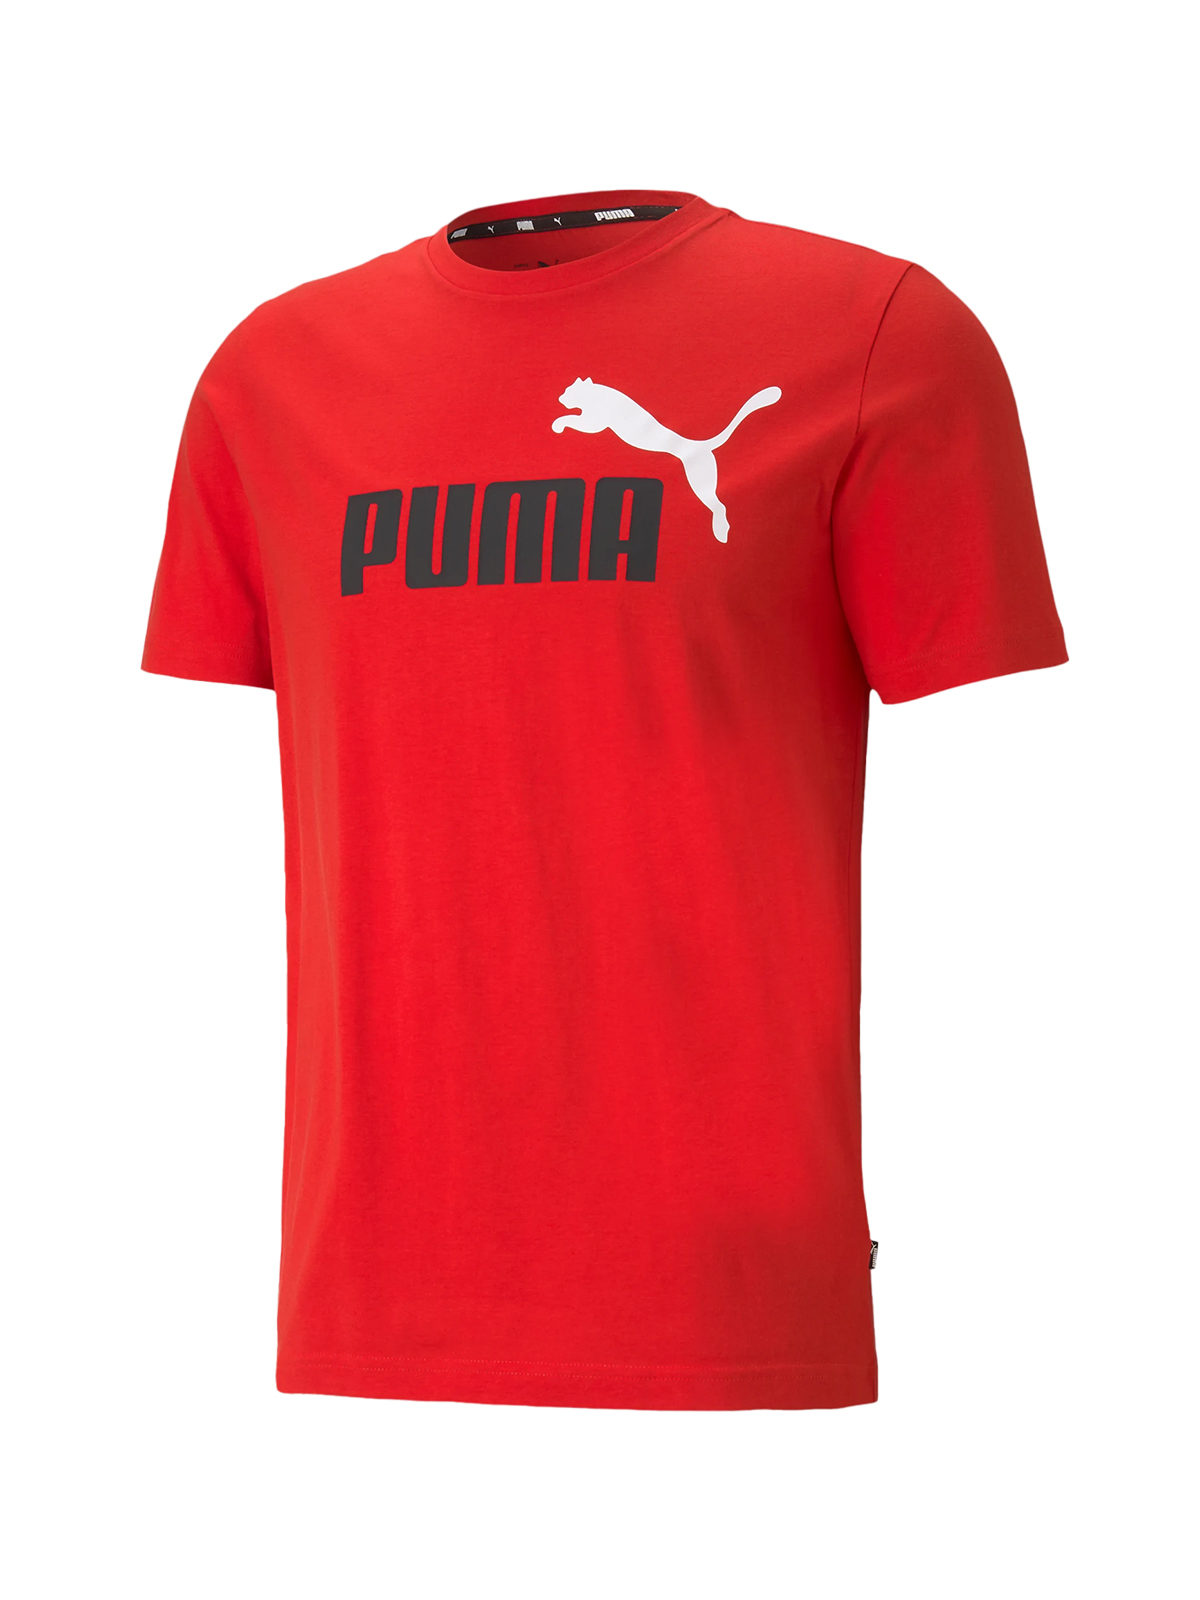 TEE Puma 20.69€ sleeve sale at ESS on 2 Men\'s LOGO COL T-shirt: short for +